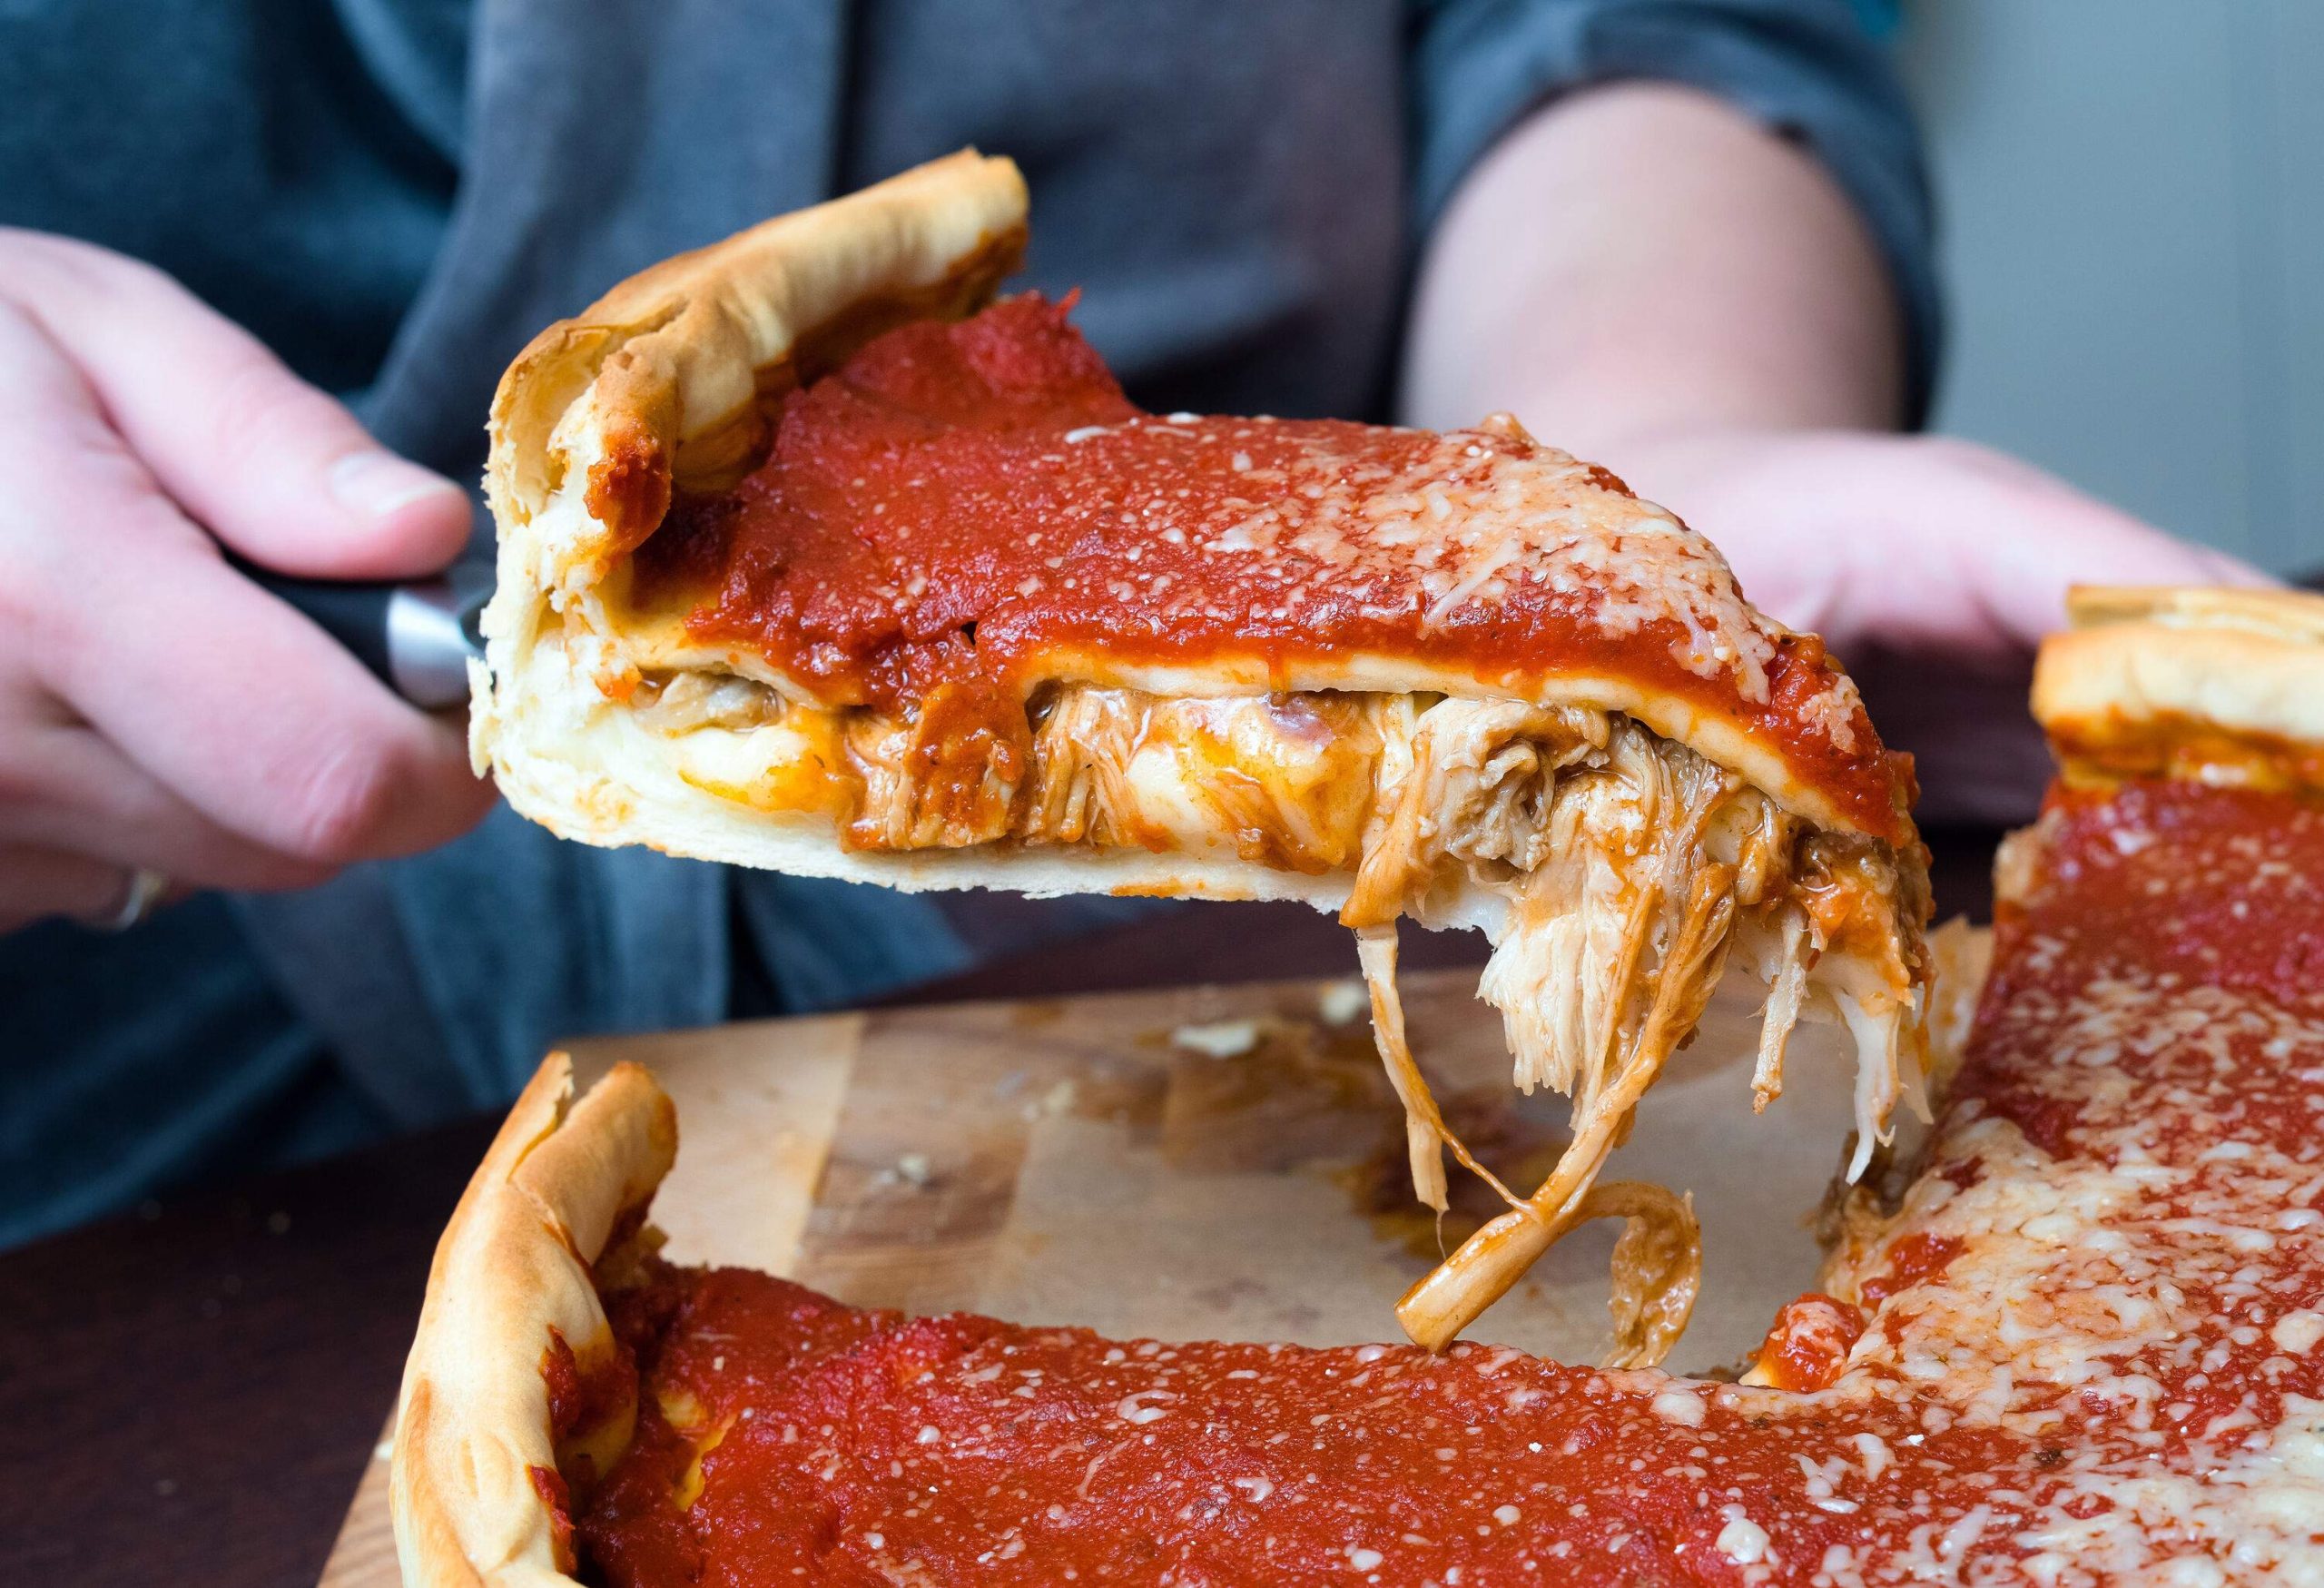 A woman's hands skillfully slice into a scrumptious Chicago-style deep dish pizza, brimming with gooey Italian cheese, rich tomato sauce, and succulent beef mince.